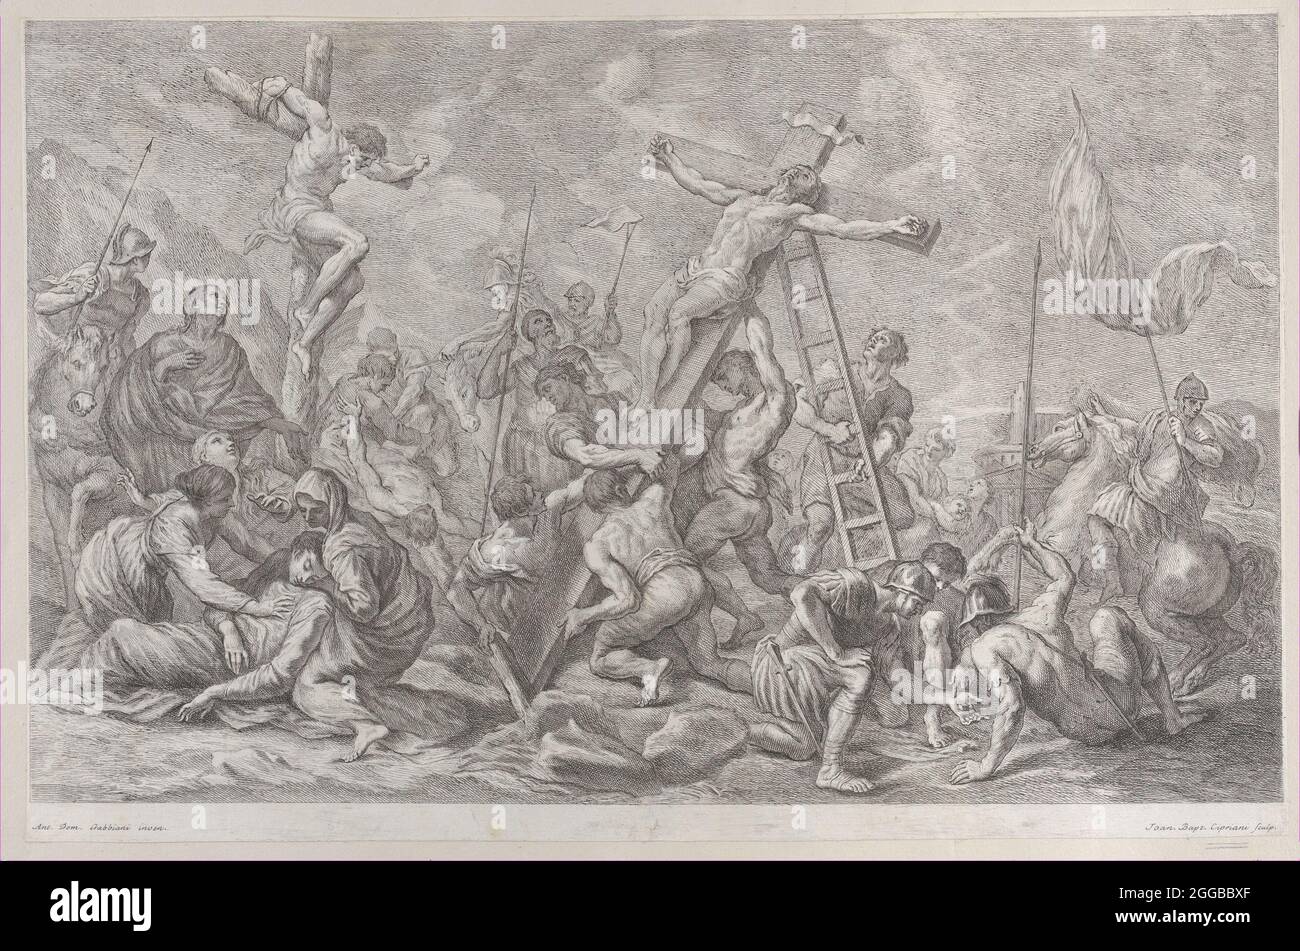 The Crucifixion, with the lowering of the cross at center, soldiers throughout, and a thief on a cross at left, 1762. Stock Photo